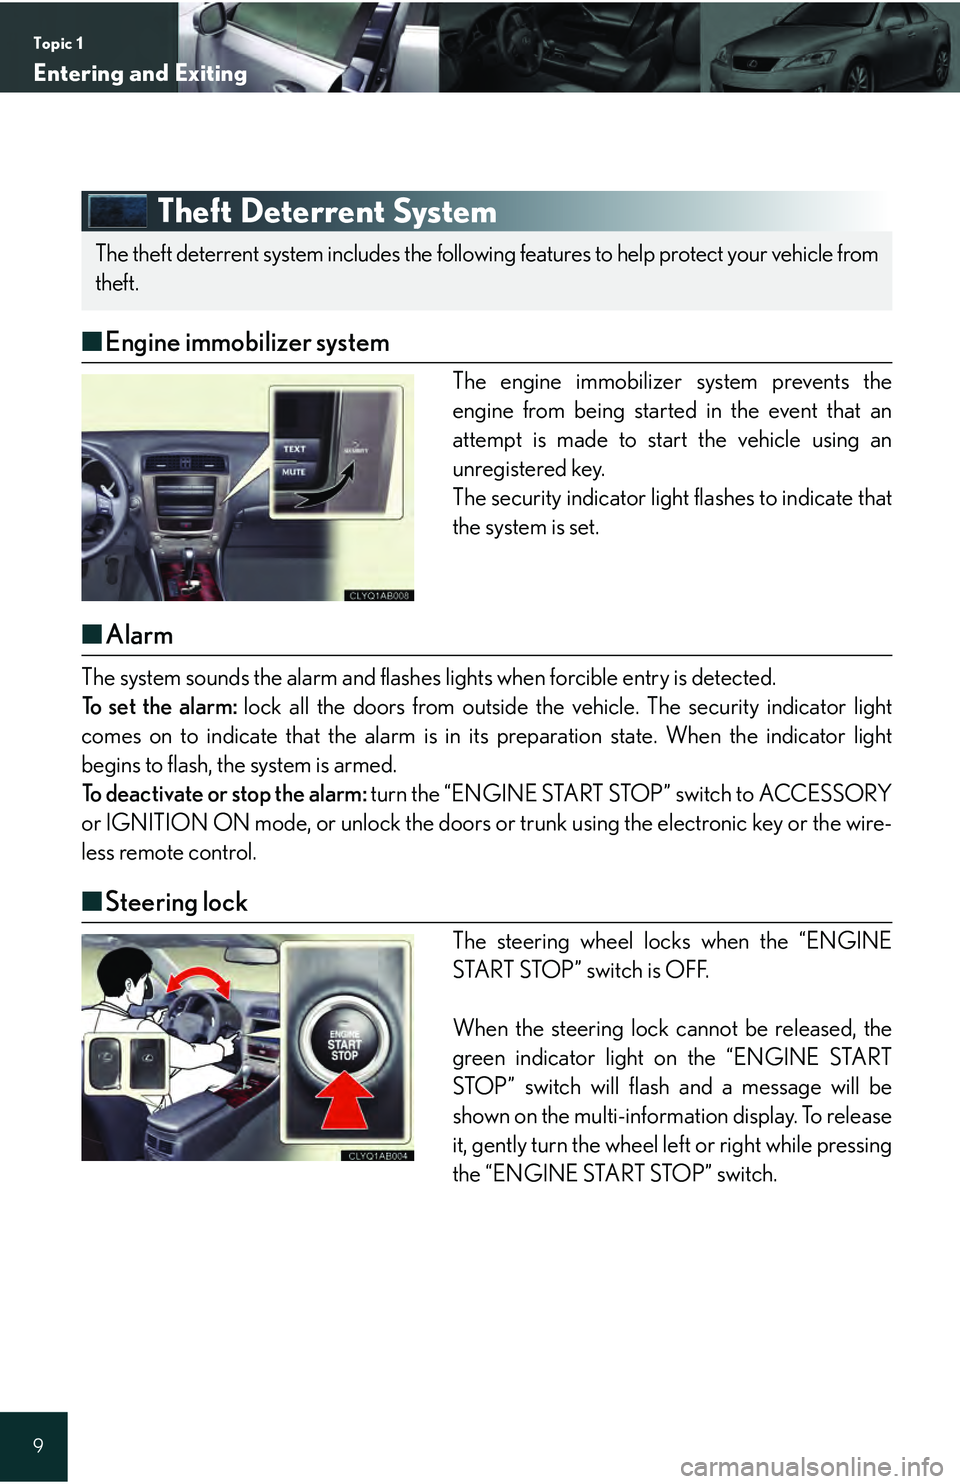 Lexus IS250 2009  Do-it-yourself maintenance / LEXUS 2009 IS350/250 QUICK GUIDE OWNERS MANUAL (OM53689U) Topic 1
Entering and Exiting
9
Theft Deterrent System
■Engine immobilizer system
The engine immobilizer system prevents the
engine from being started in the event that an
attempt is made to start th